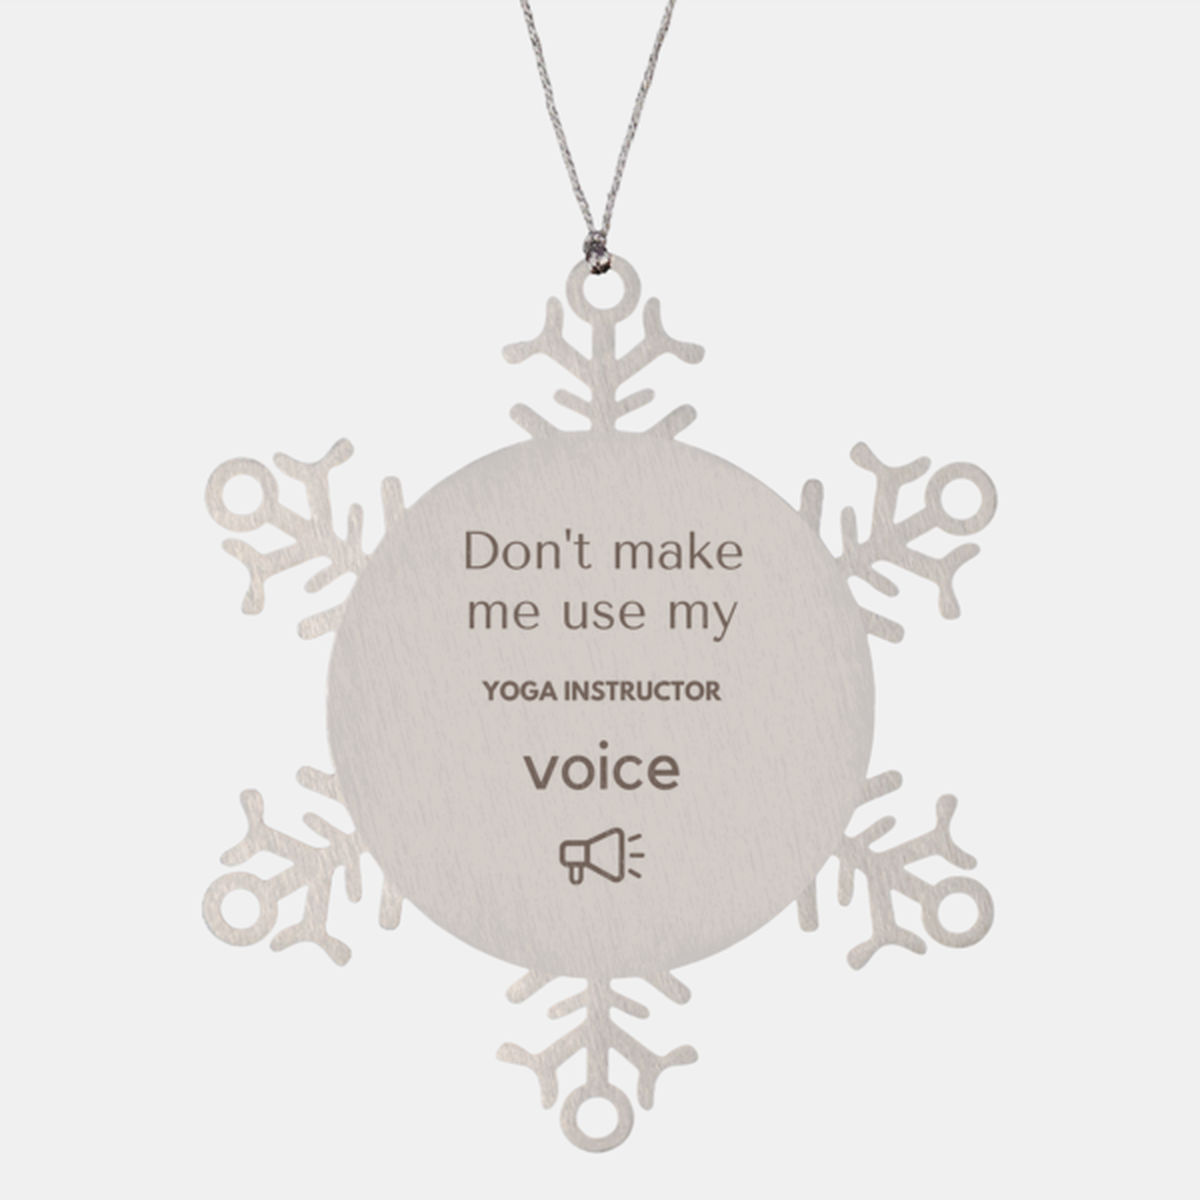 Don't make me use my Yoga Instructor voice, Sarcasm Yoga Instructor Ornament Gifts, Christmas Yoga Instructor Snowflake Ornament Unique Gifts For Yoga Instructor Coworkers, Men, Women, Colleague, Friends